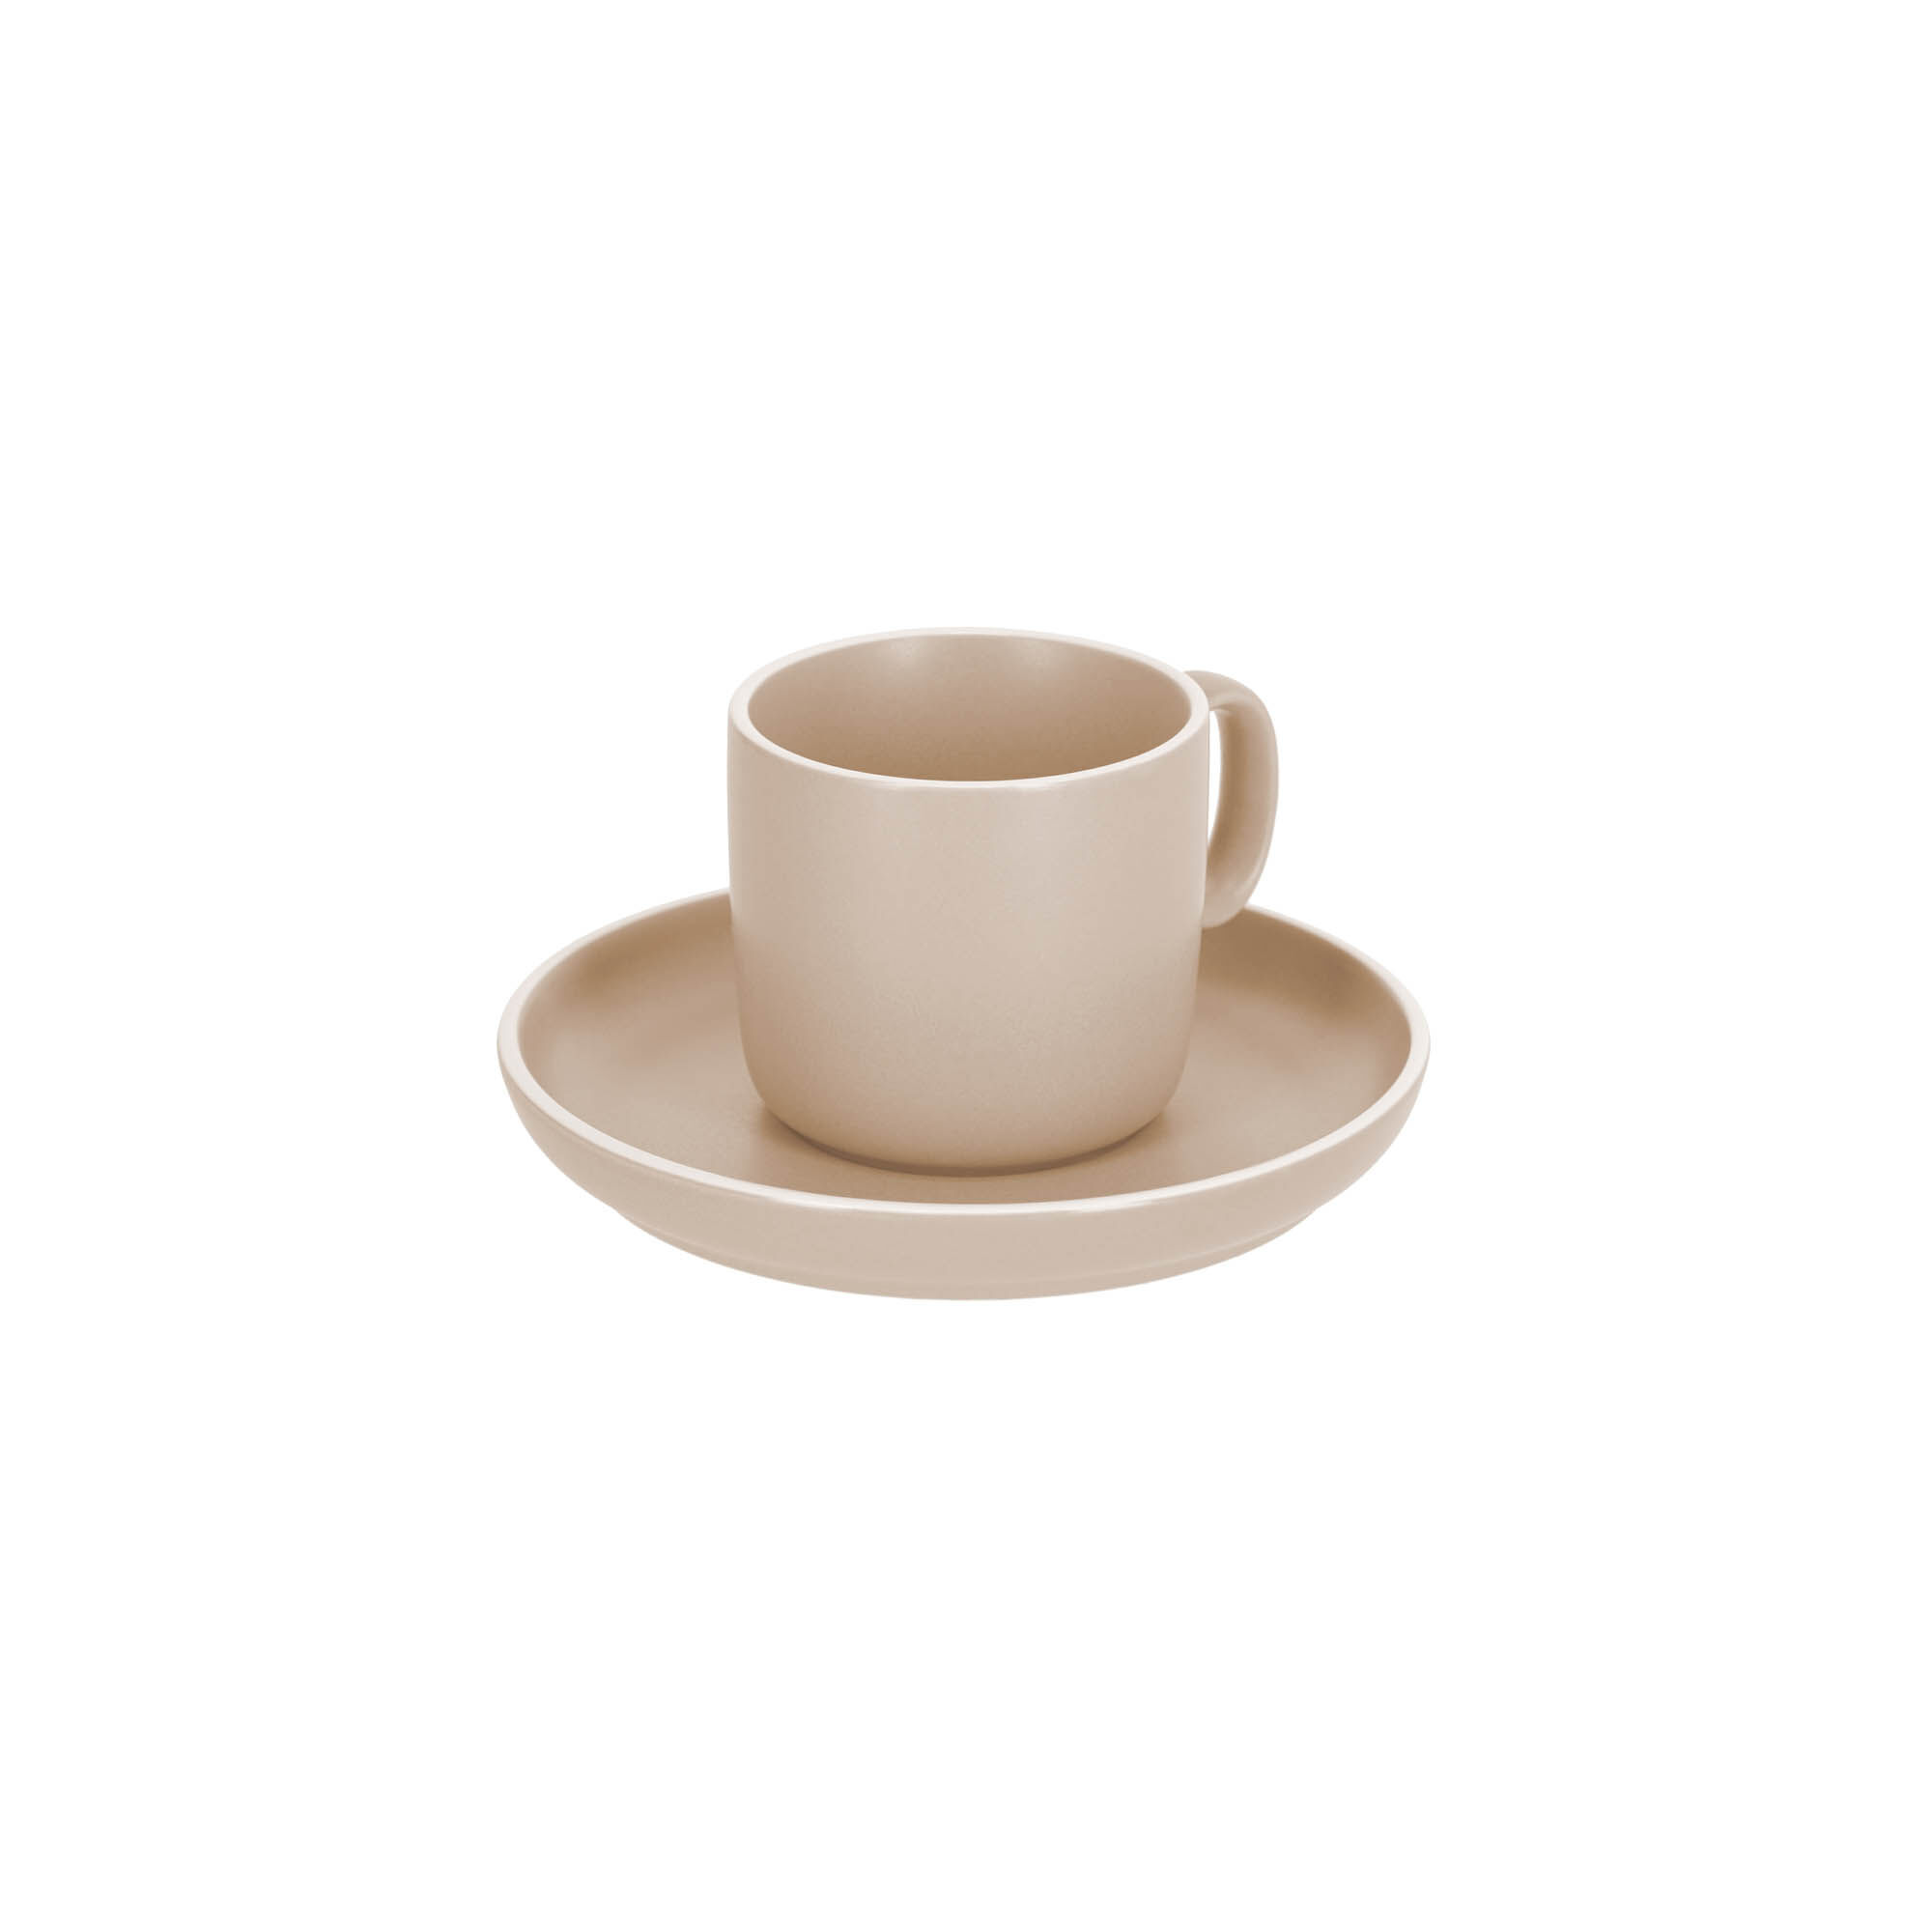 Kave Home Shun coffee cup and saucer in beige porcelain